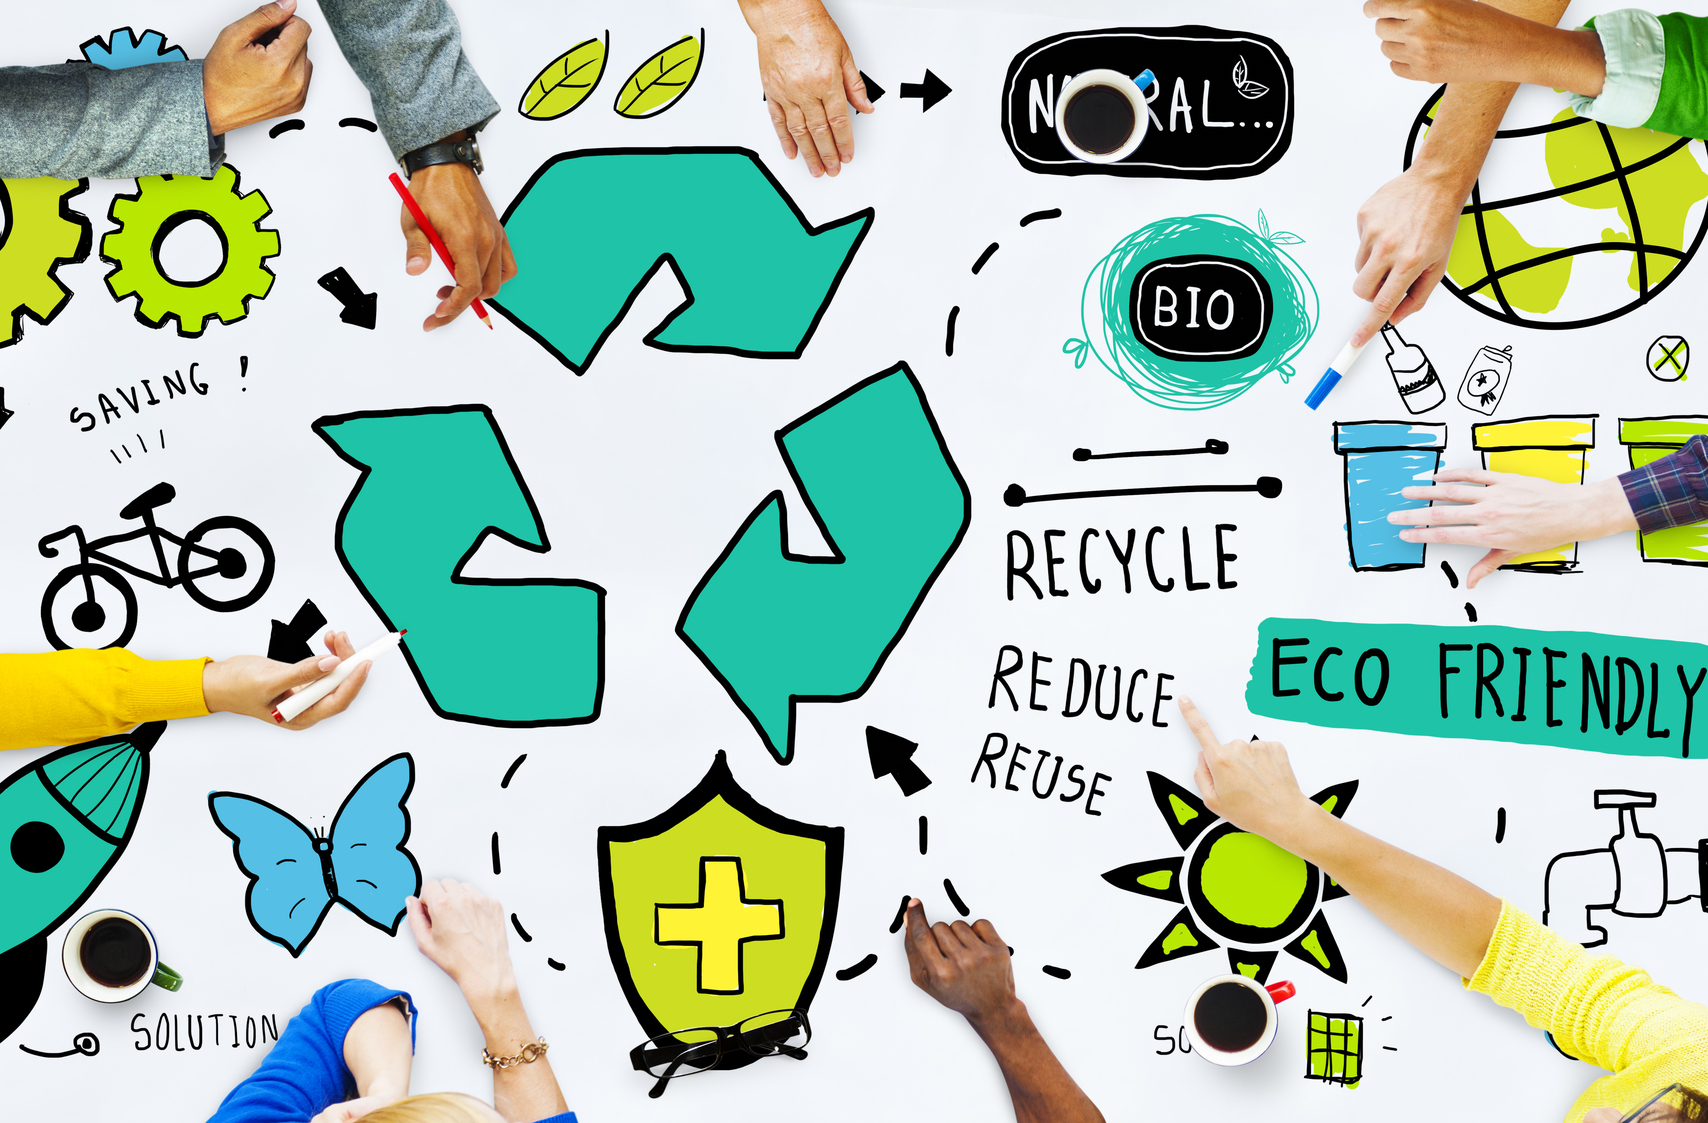 Recycling week ideas for the workplace | KS Environmental